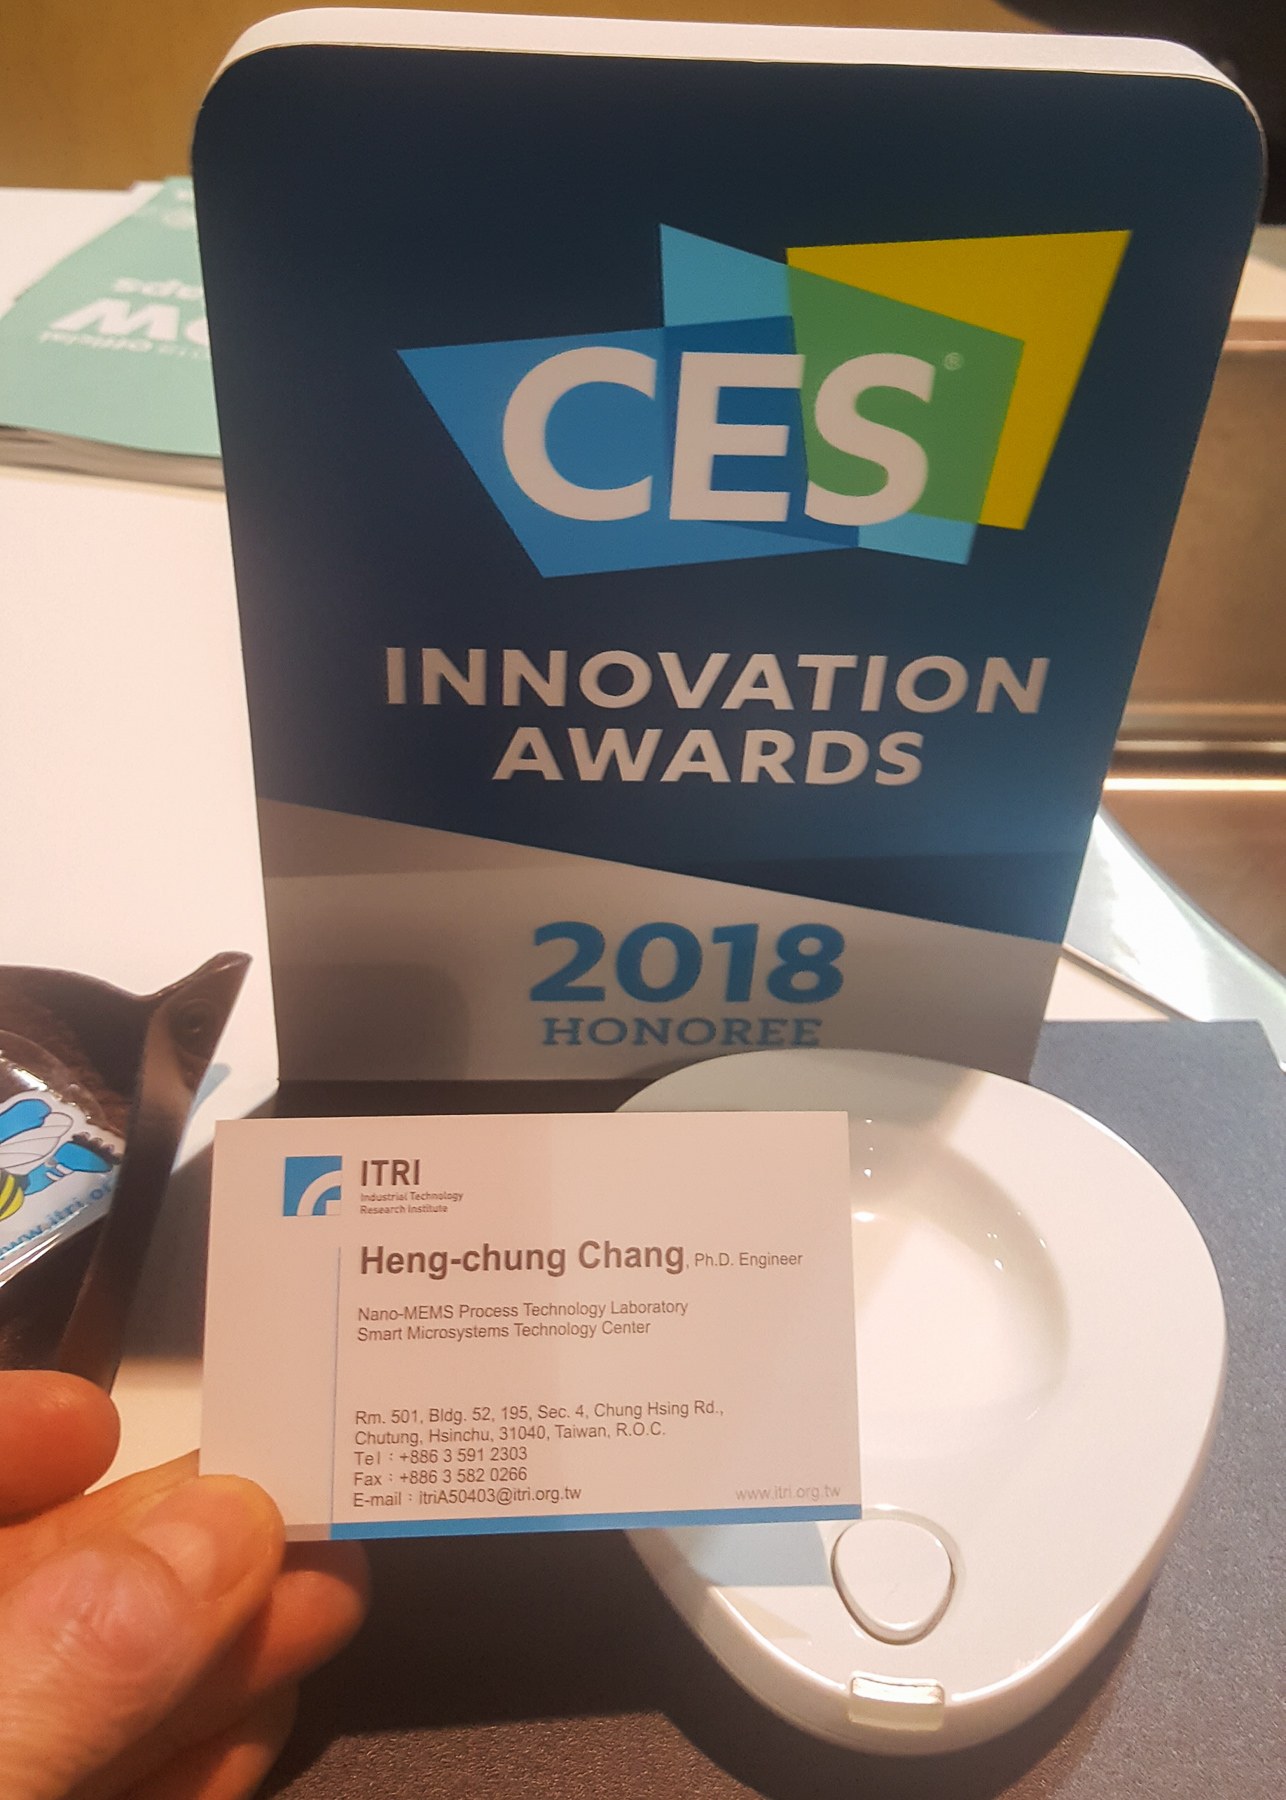 2018 Welcomes Entrepreneurs Back to the CES on Wednesday January 10, 2018 in Sin City Las Vegas with Globe Trotting Entrepreneur Michael S Novilla